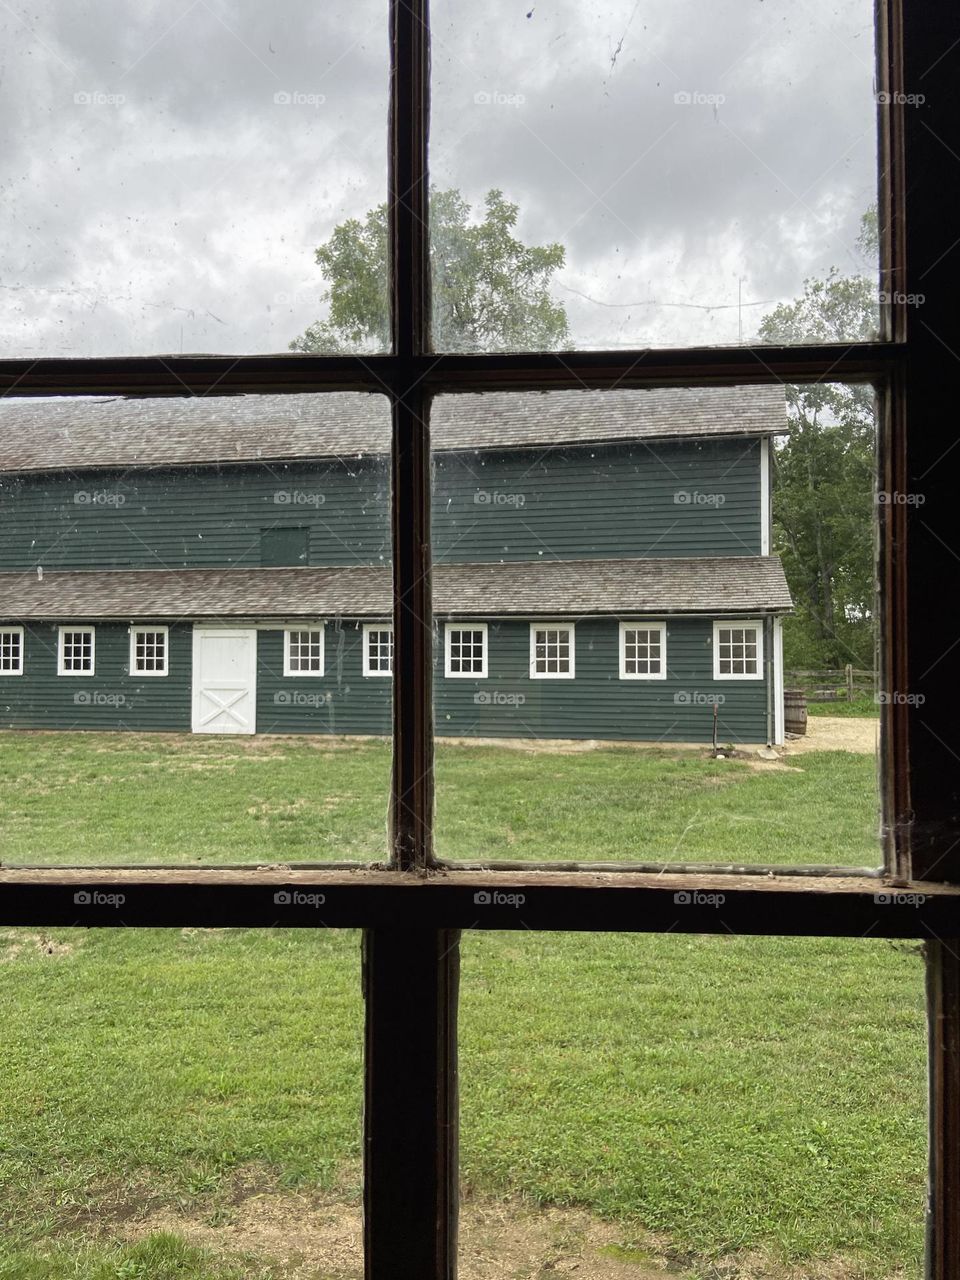 A photo of a green barn taken from the window of the Carriage House at Historic Walnford County Park in Upper Freehold, NJ. It is an area rich in agricultural, technological, environmental and social history dating back over 200 years. 